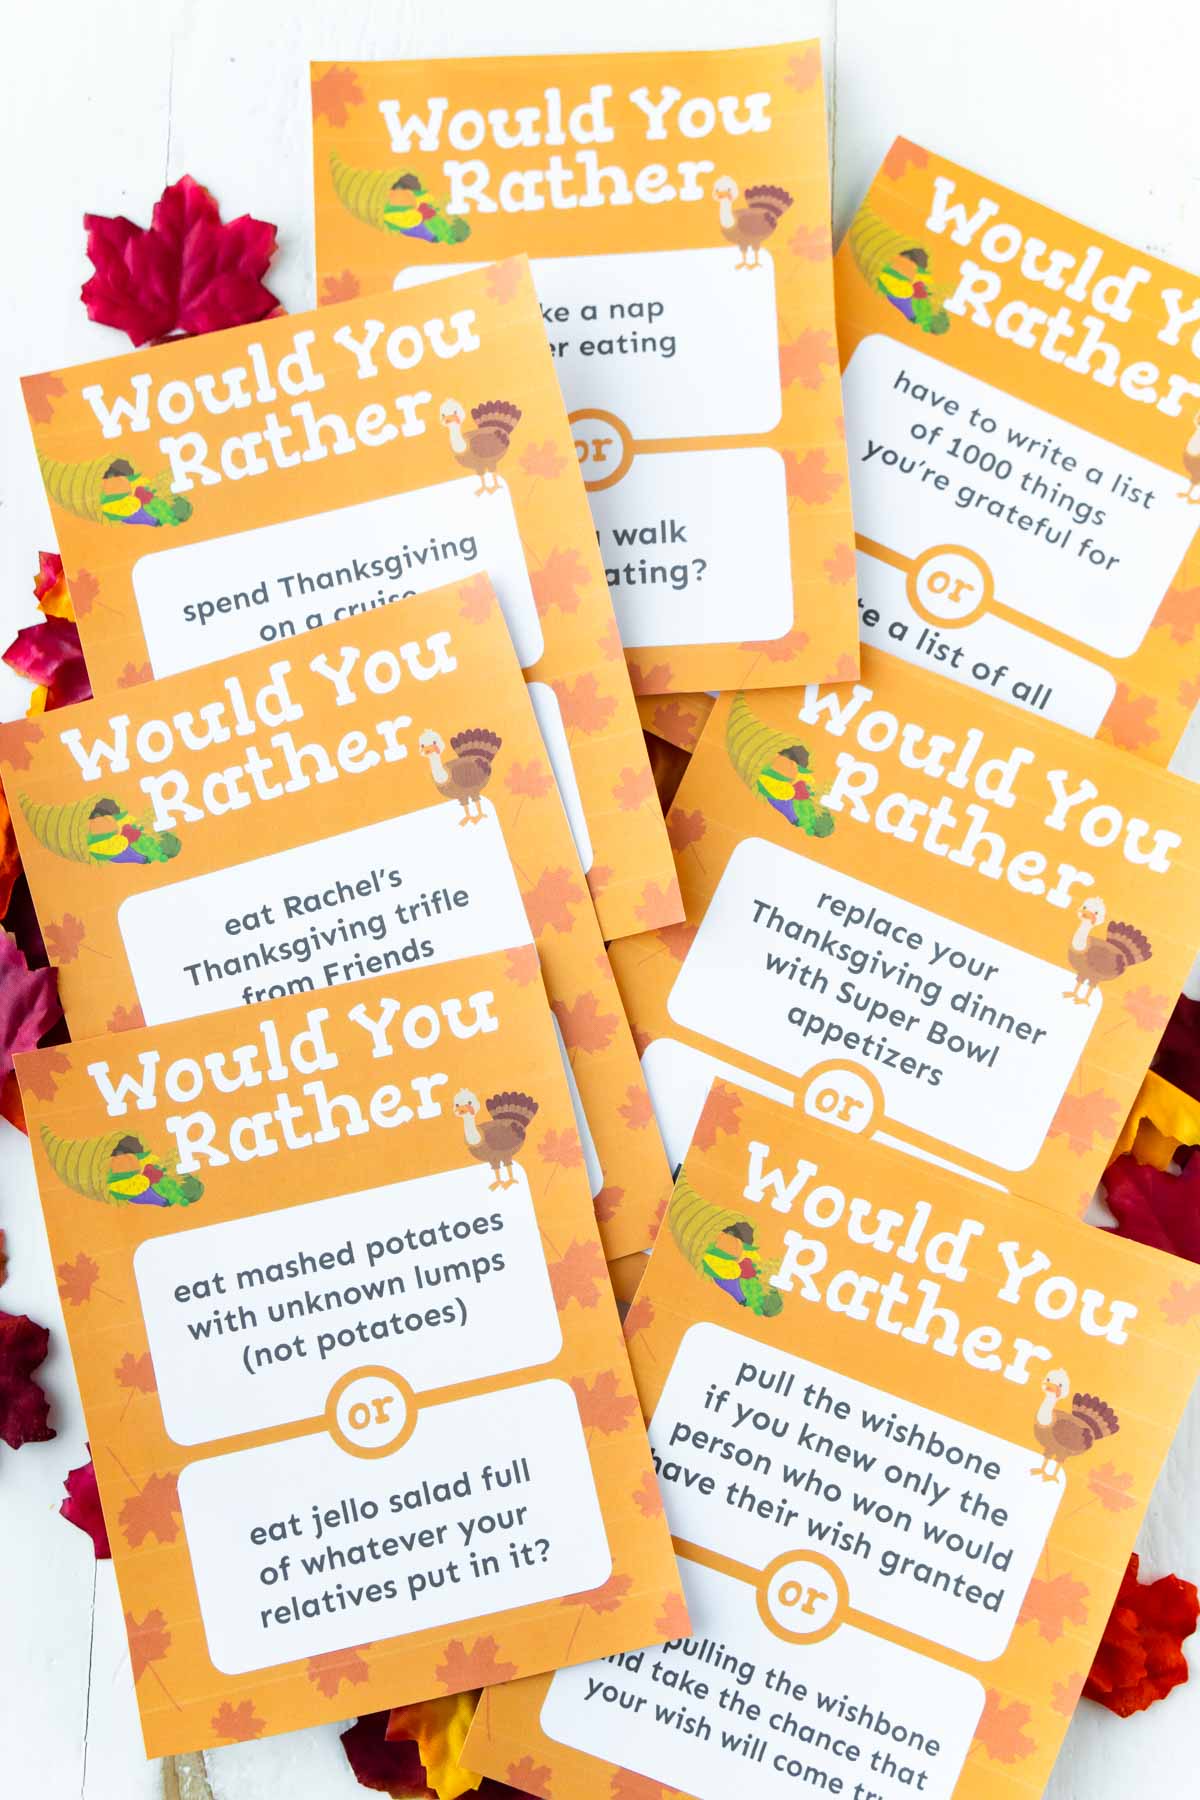 Best Would You Rather Questions for Teens & Tweens PDF